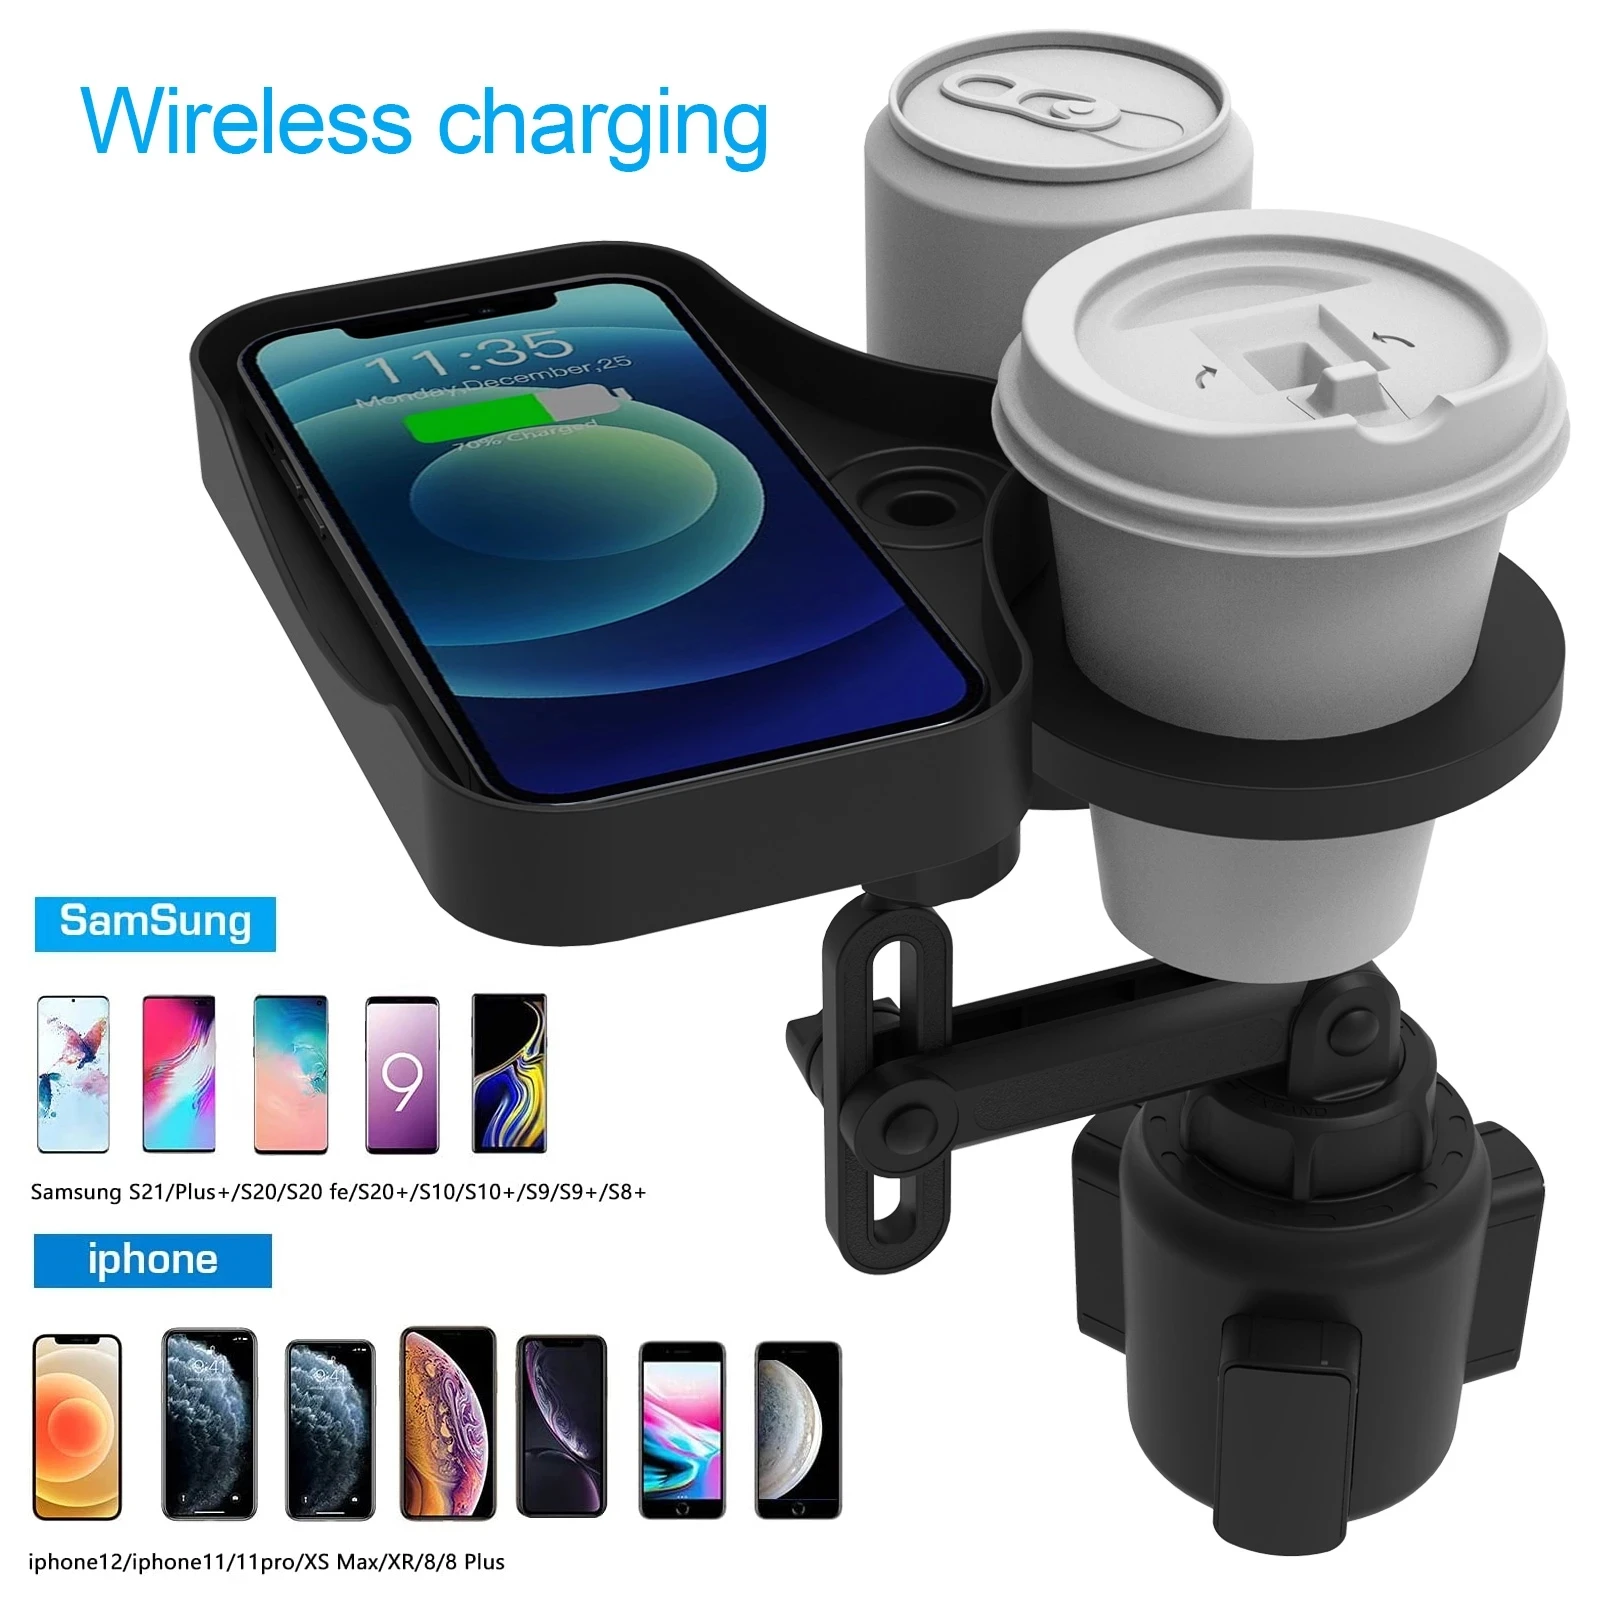 3 in 1 Mintiml Car Cup Holder Expander Adapter Slip-proof Car Truck Drink Cup Holders With Wireless Charging Board Container